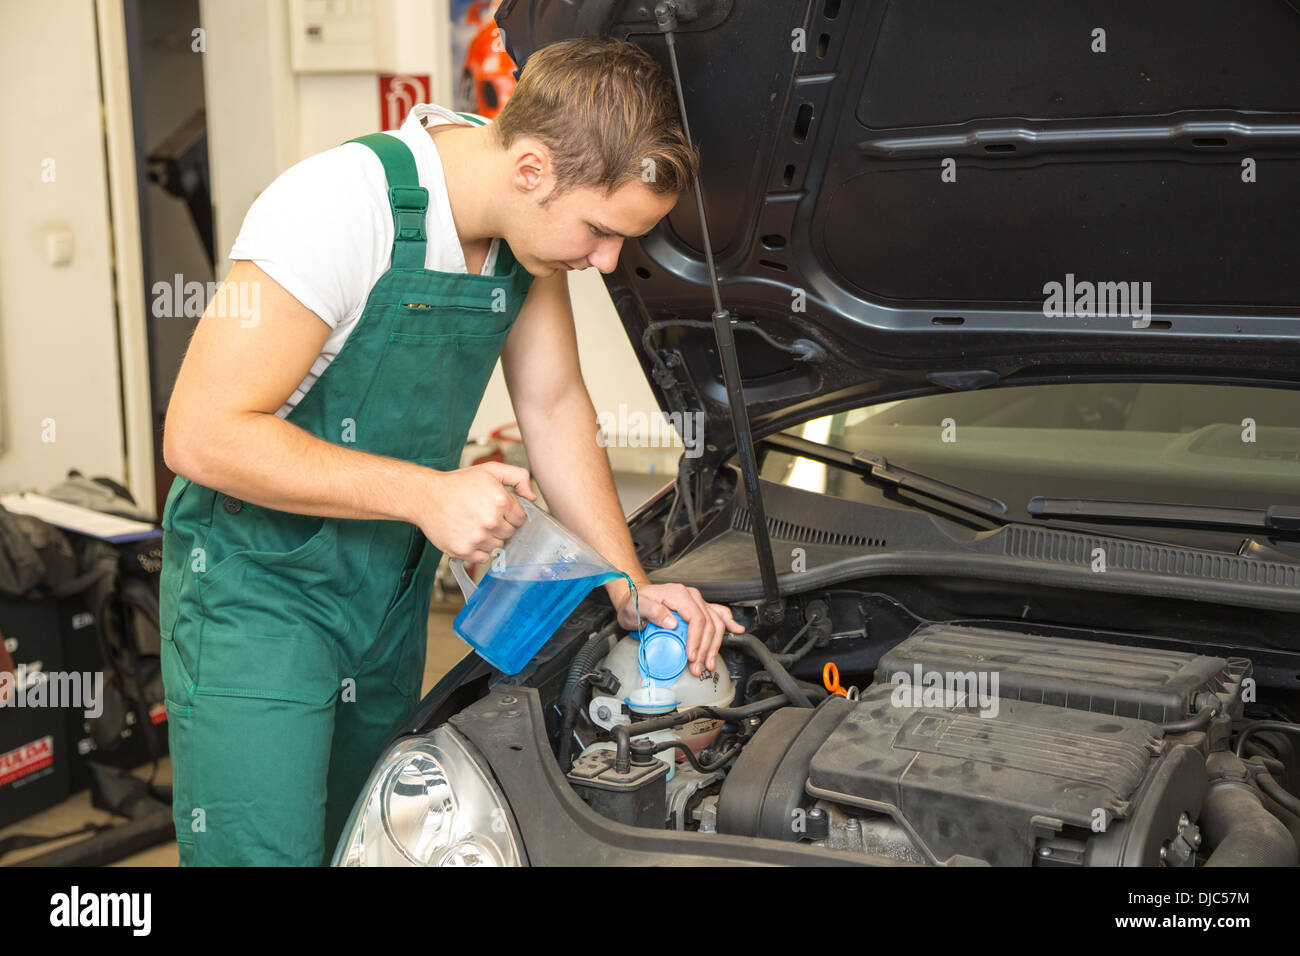 Mechanic refills coolant or cooling fluid in motor of a car Stock Photo